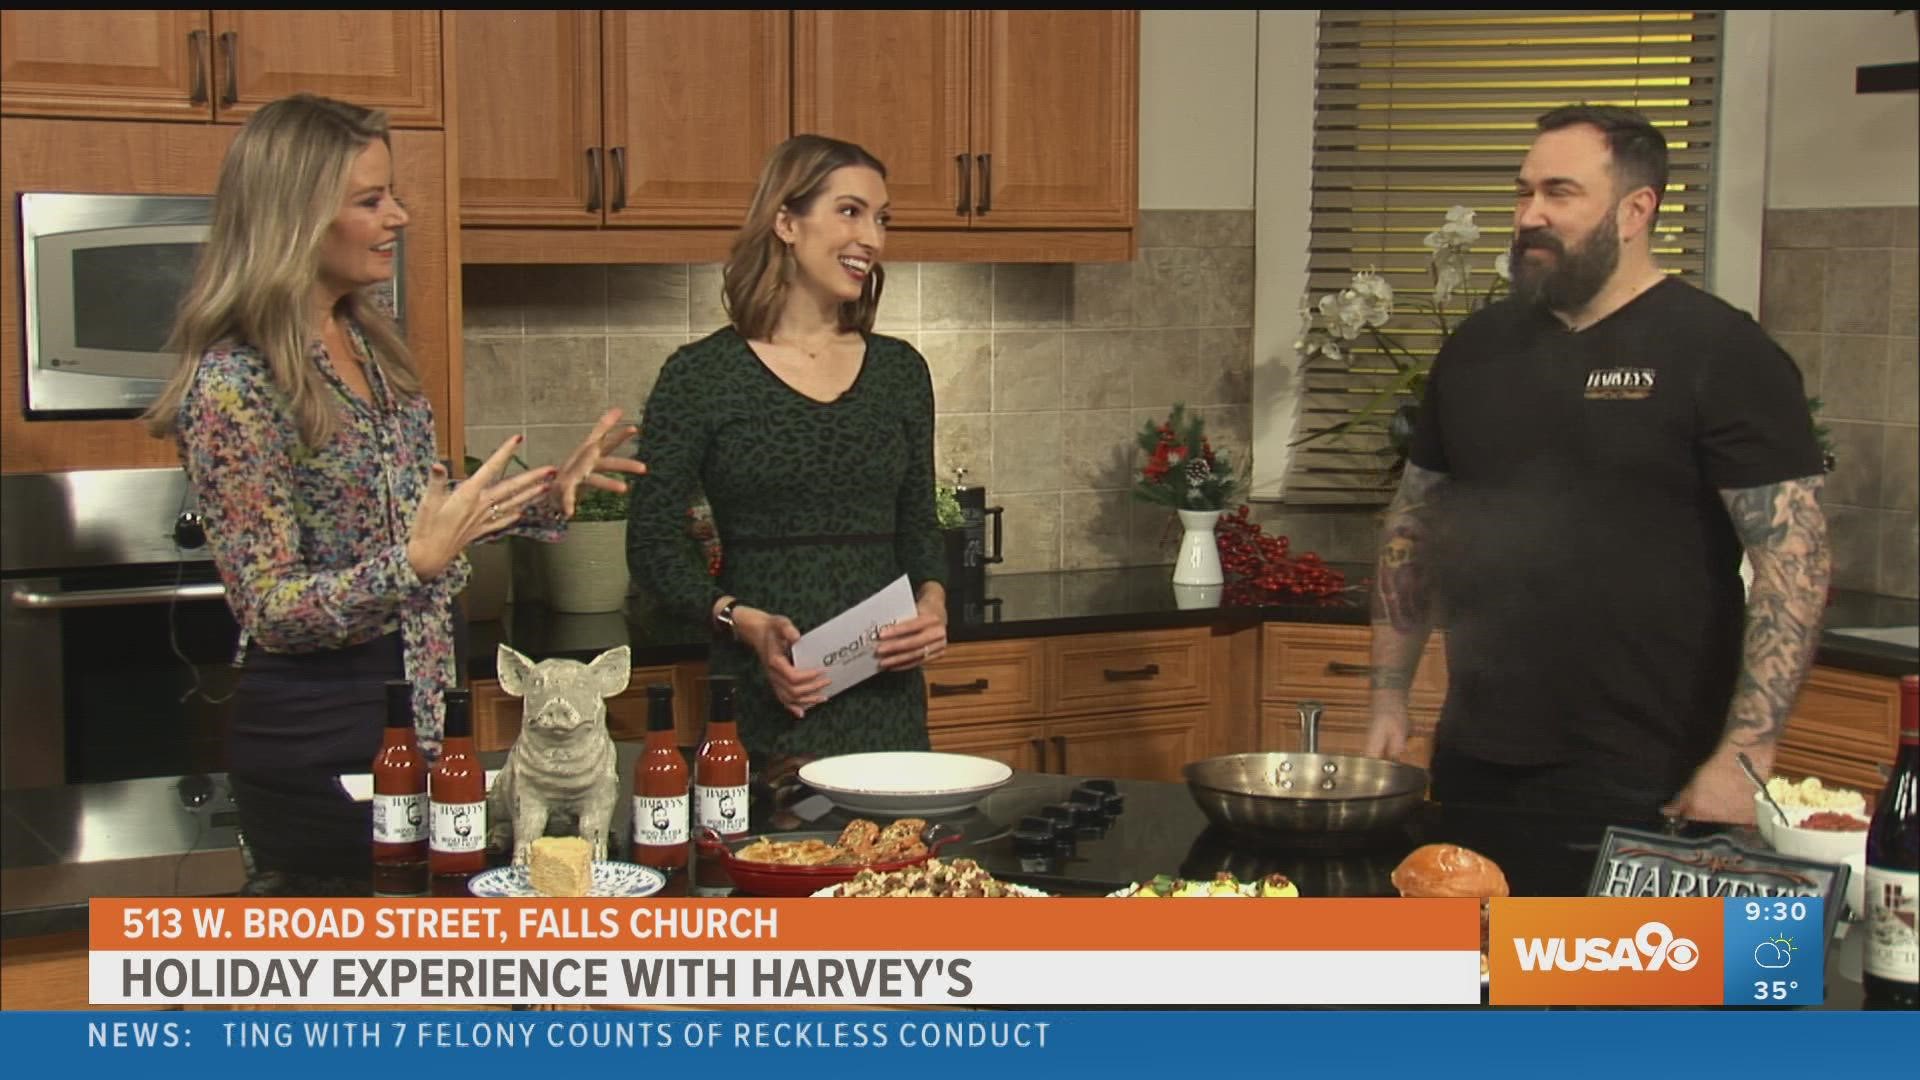 Harvey's in Falls Church offers a special Christmas Eve dinner menu. Executive Chef & Owner Thomas Harvey demonstrates how to prepare Fusilli Bolognese.